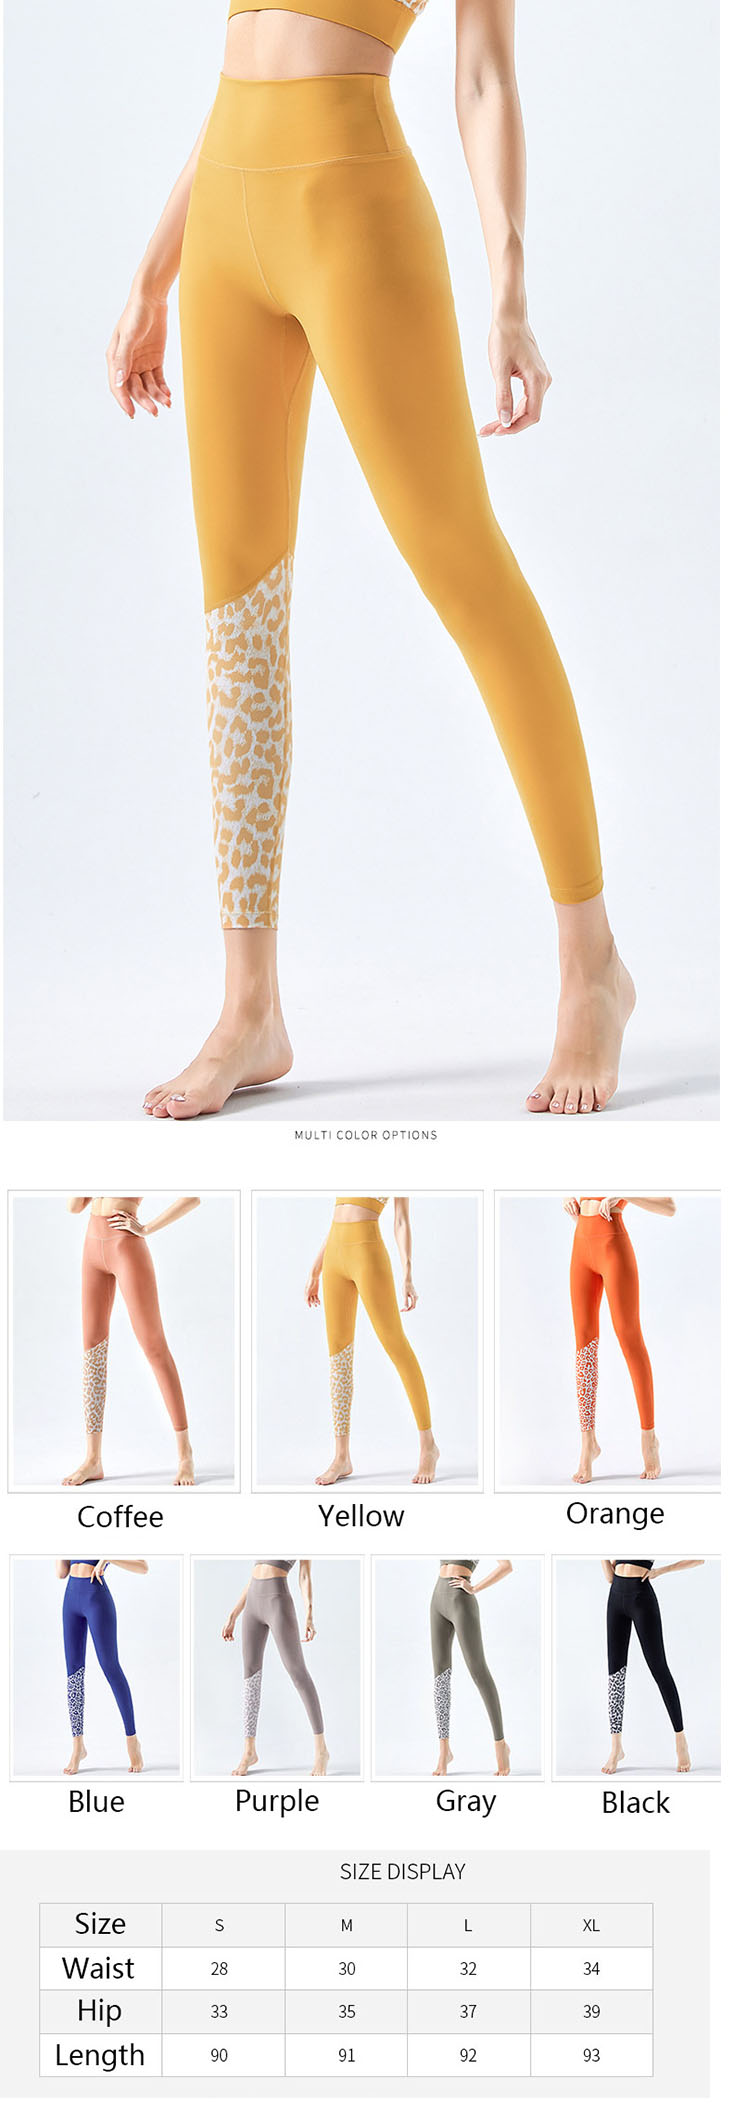 Leopard print yoga leggings has become a favorite pattern element for woolen items in this autumn and winter